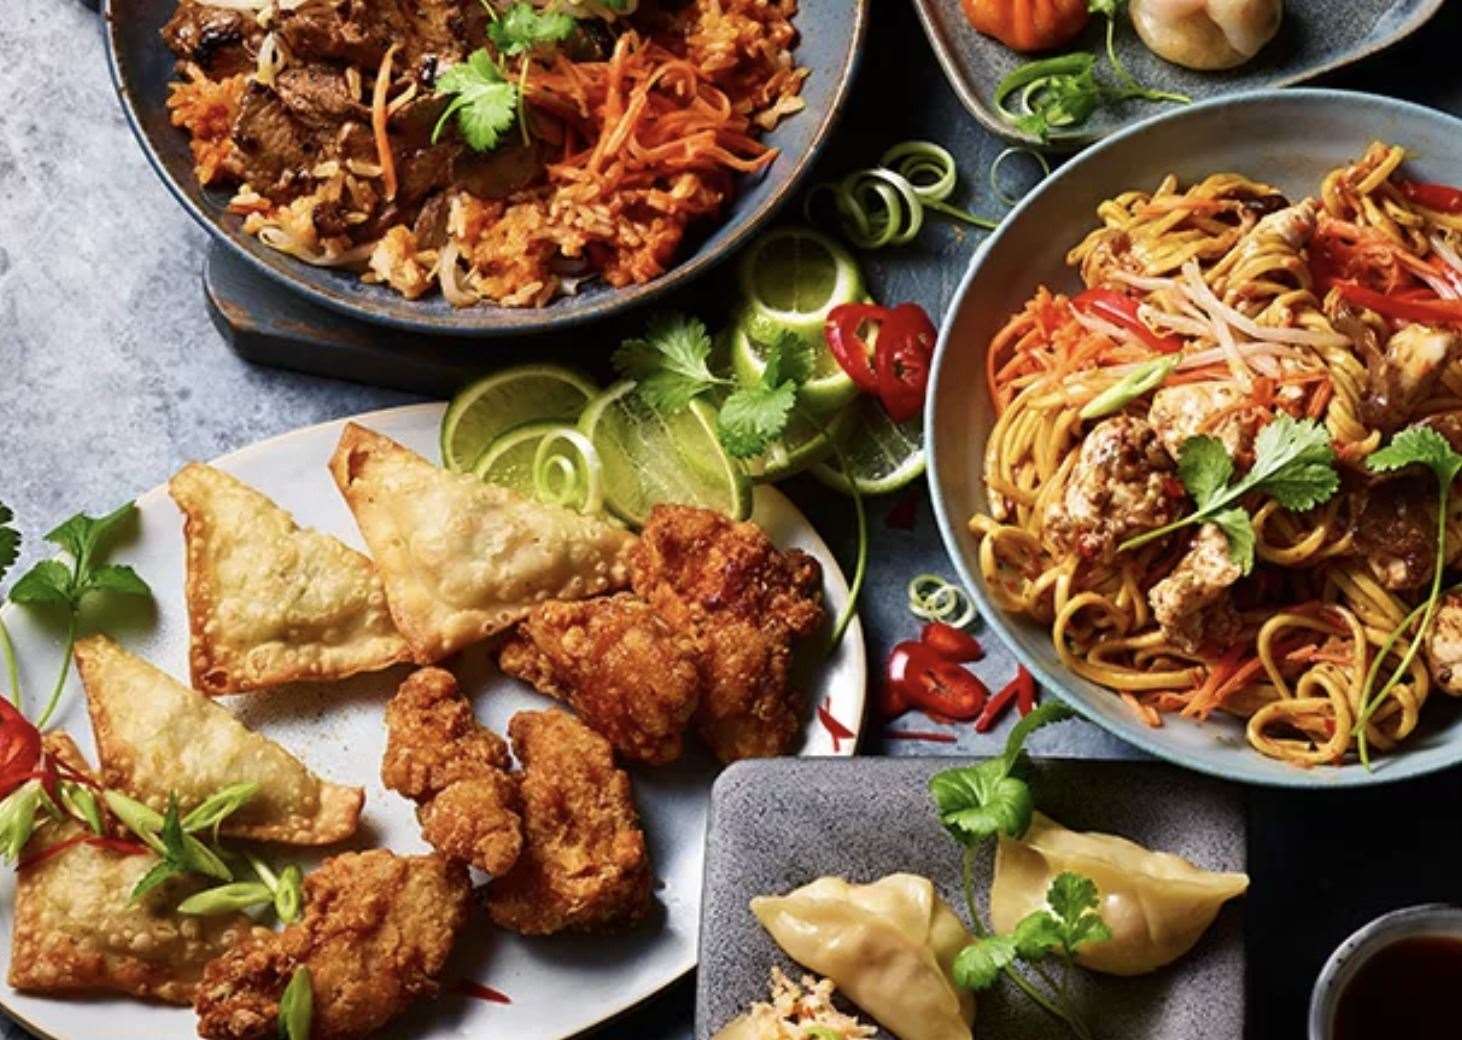 M&S says it can feed four people its Asian Fusion meal deal for £20